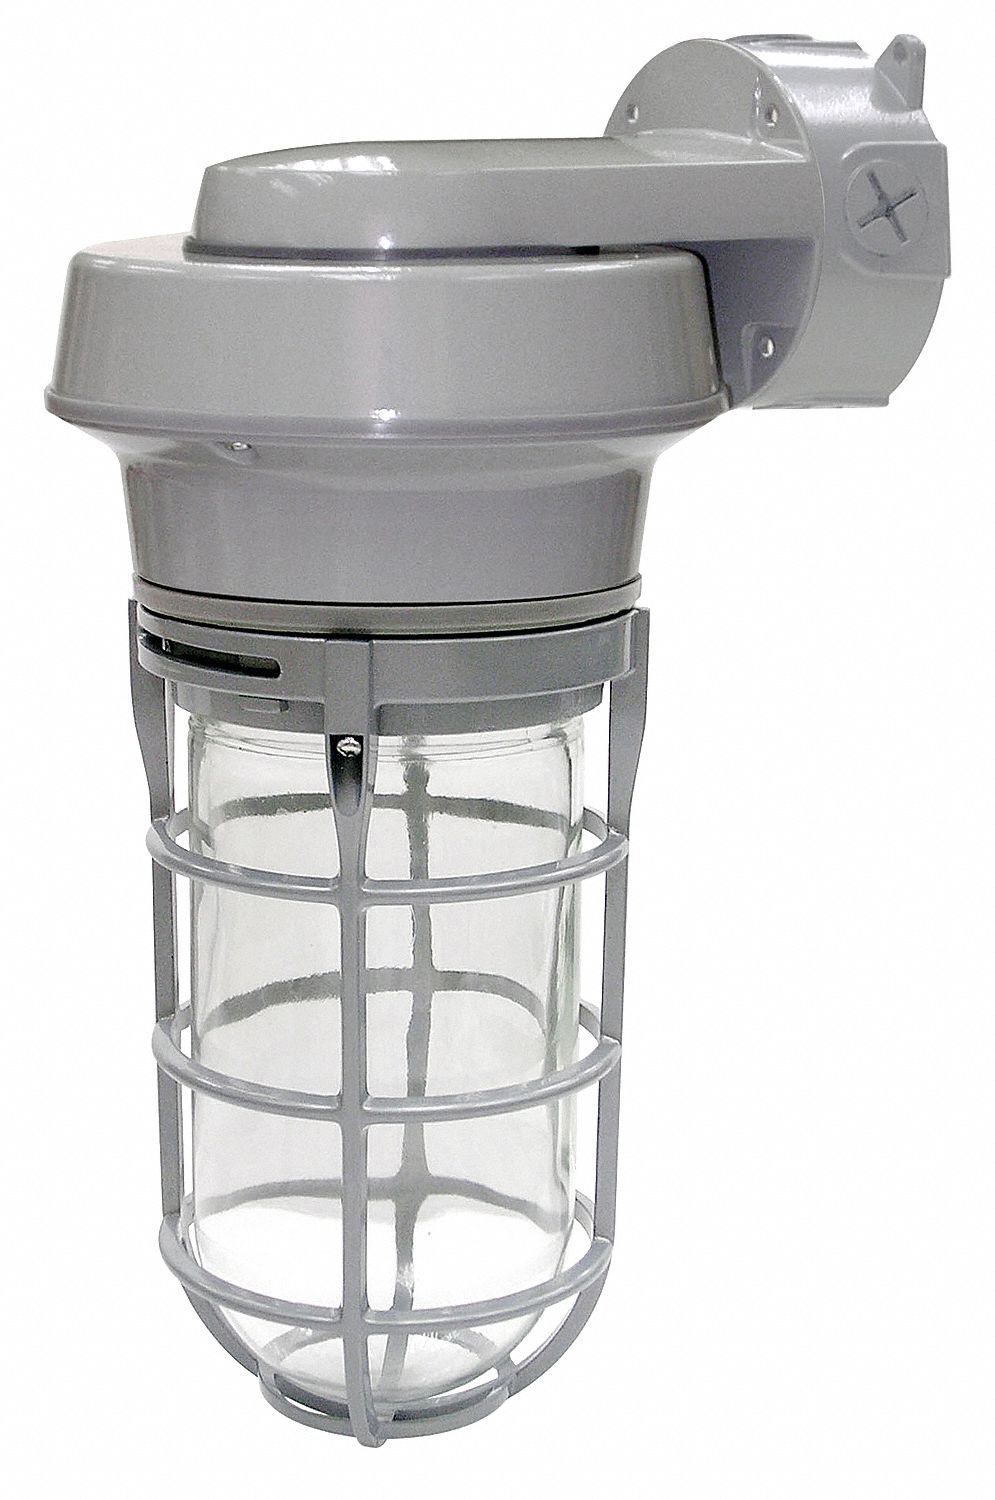 VAPOUR TIGHT FIXTURE, 100 W MAXIMUM, WALL MOUNT, 120 V, CLEAR GLASS GLOBE, GREY